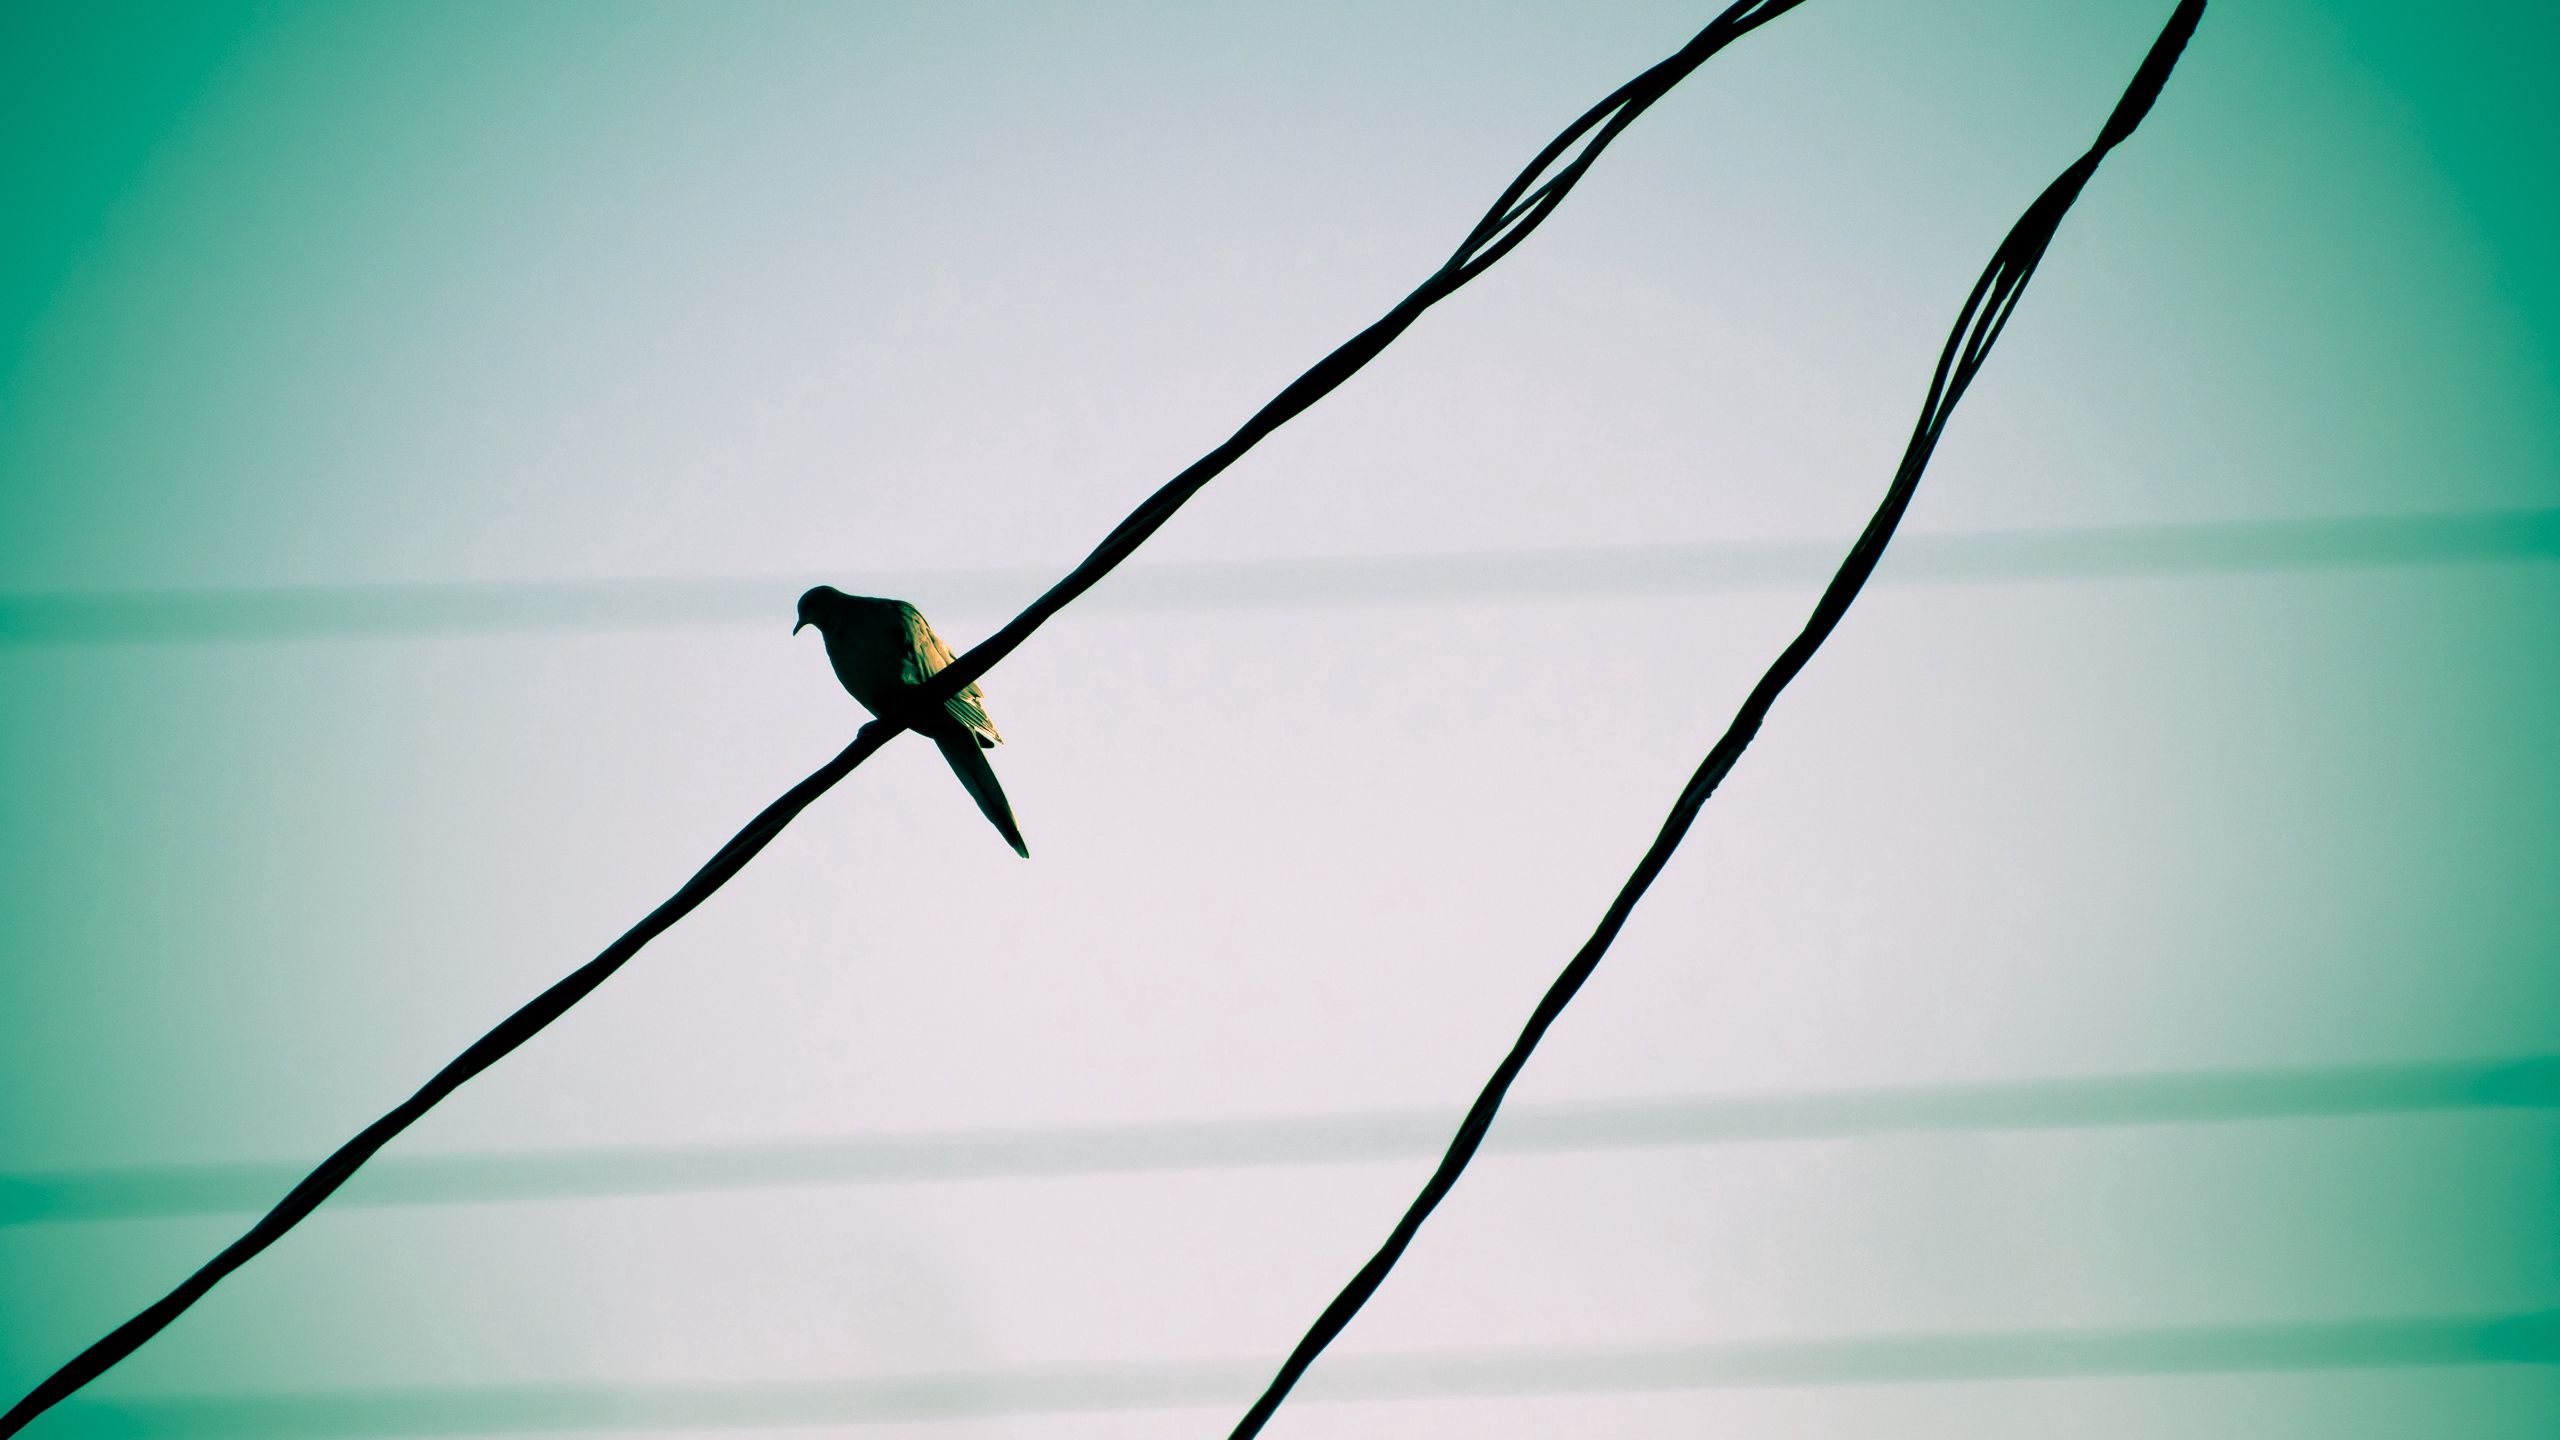 wallpapers wires, animals, sky, bird, wire, expectation, waiting